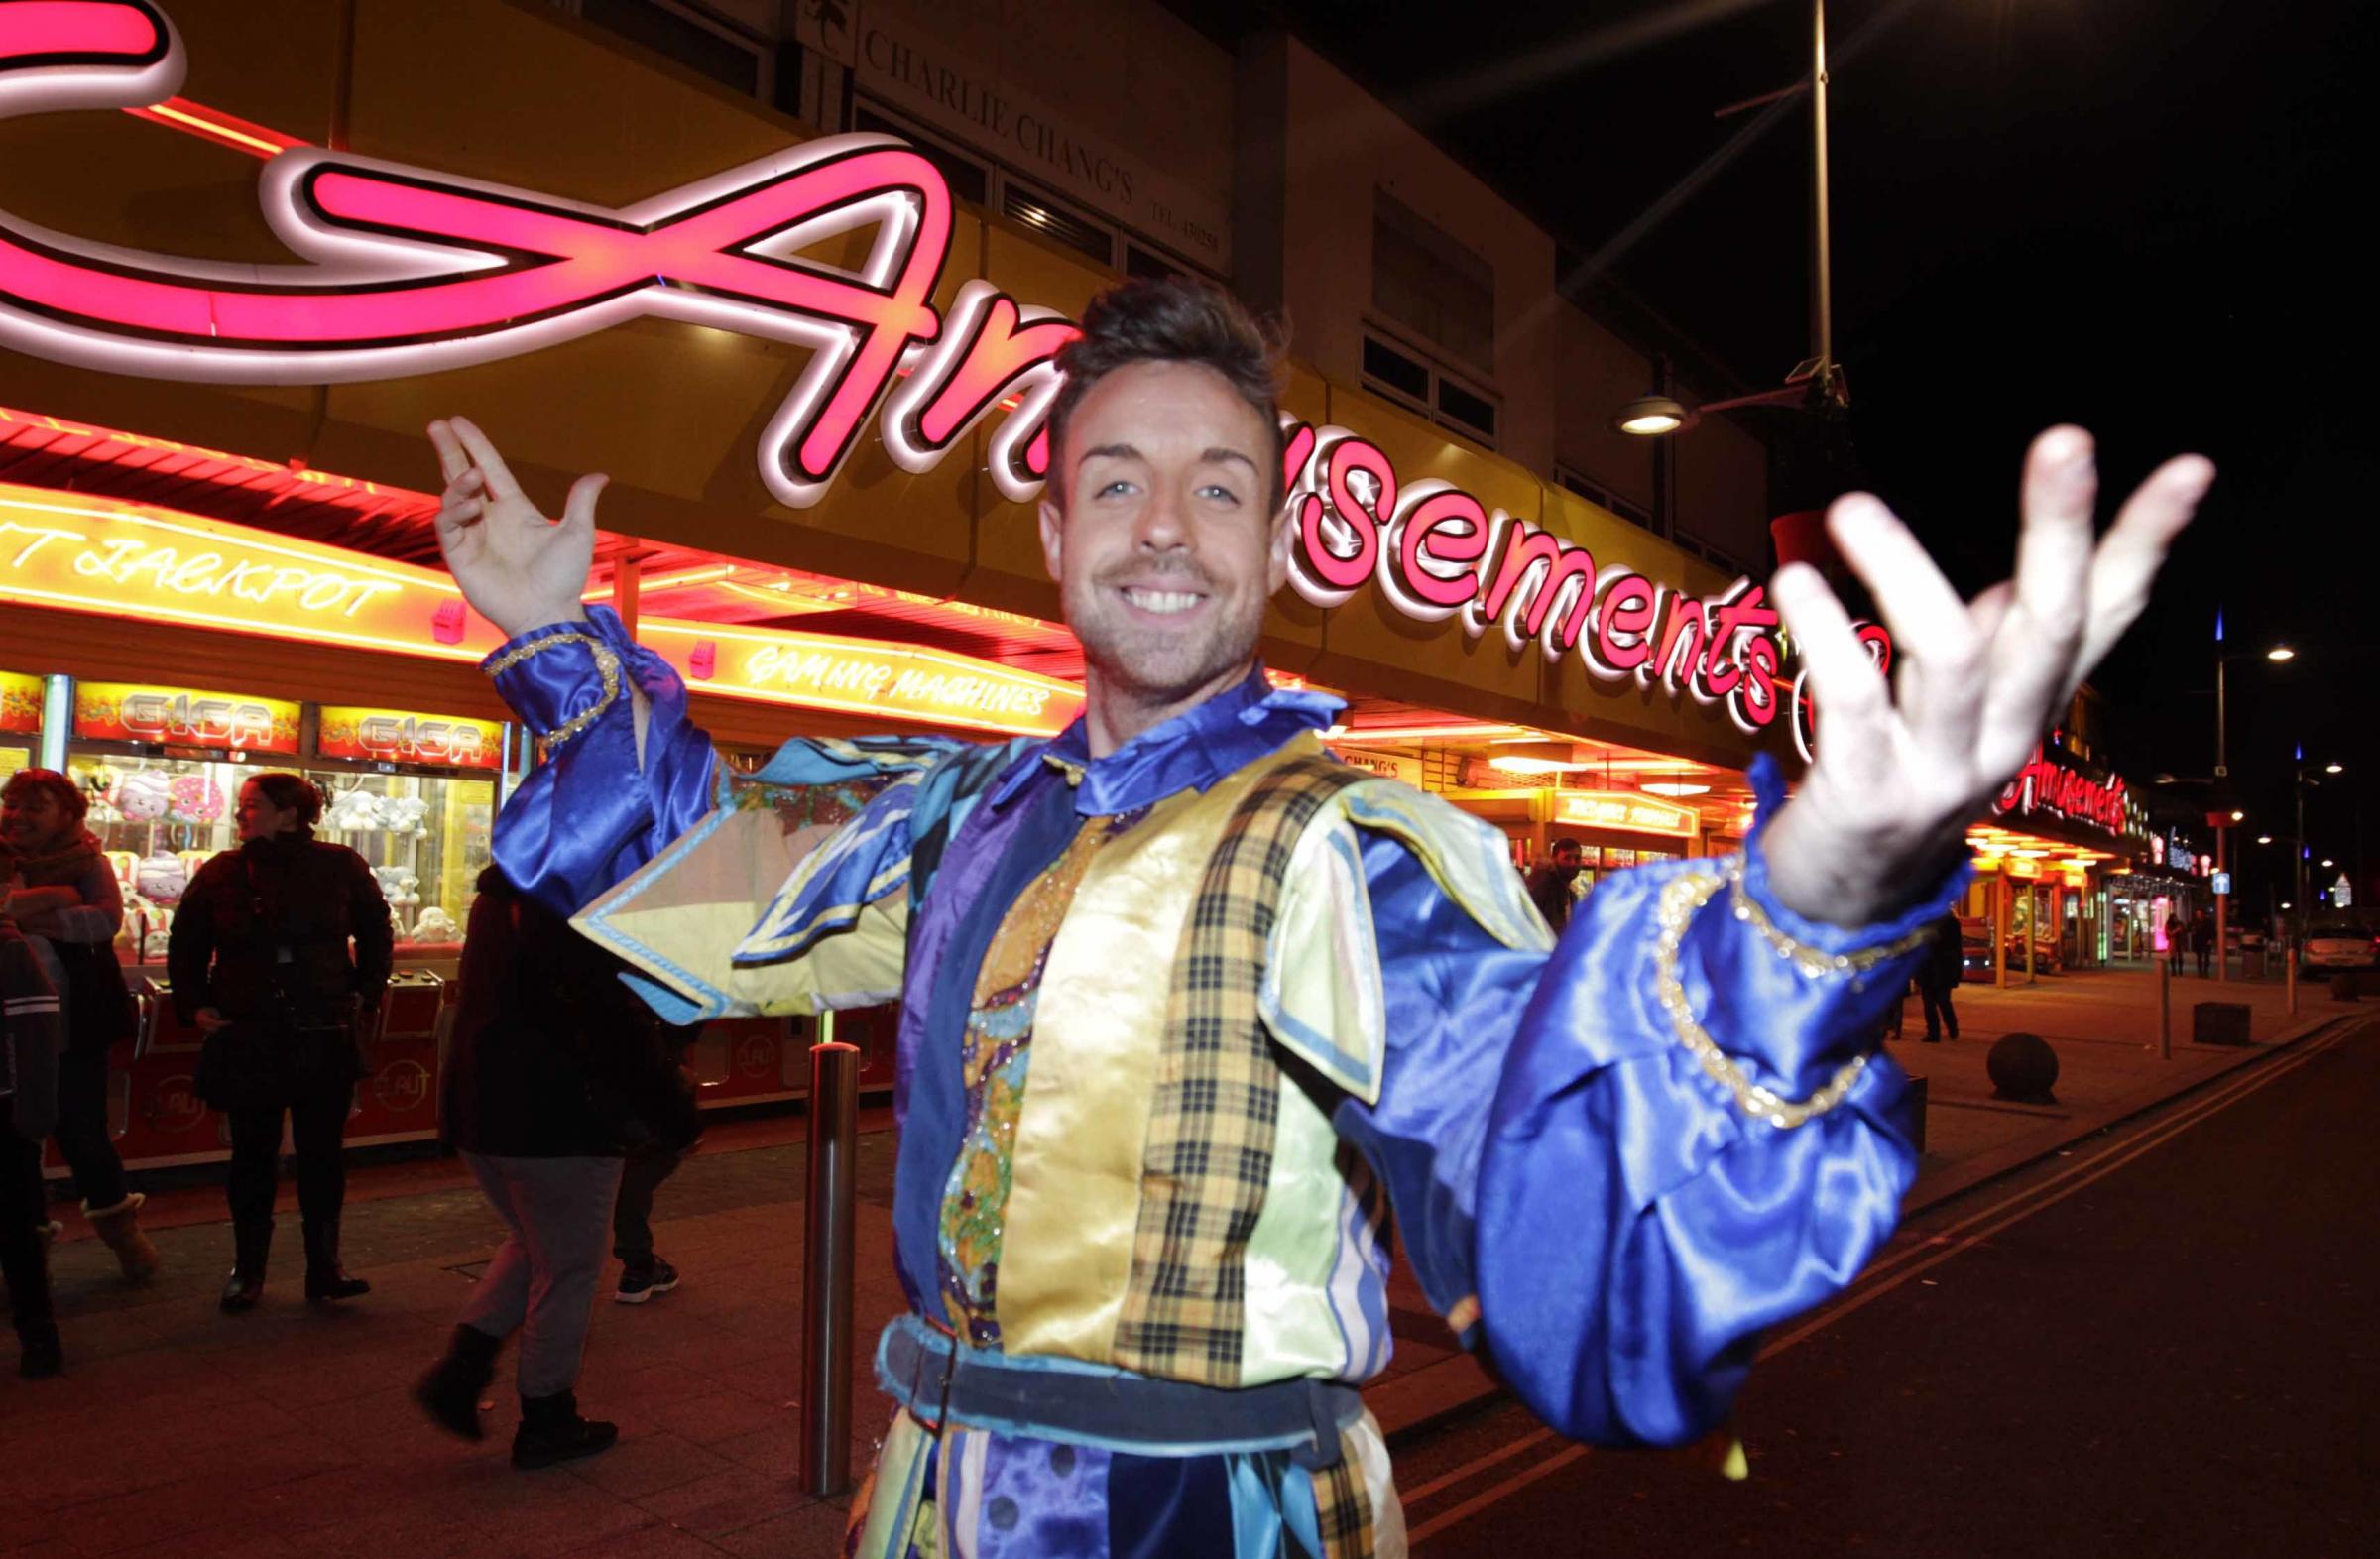 Star - Panto and X-Factor icon Stevi Ritchie help Clacton celebrate Christmas